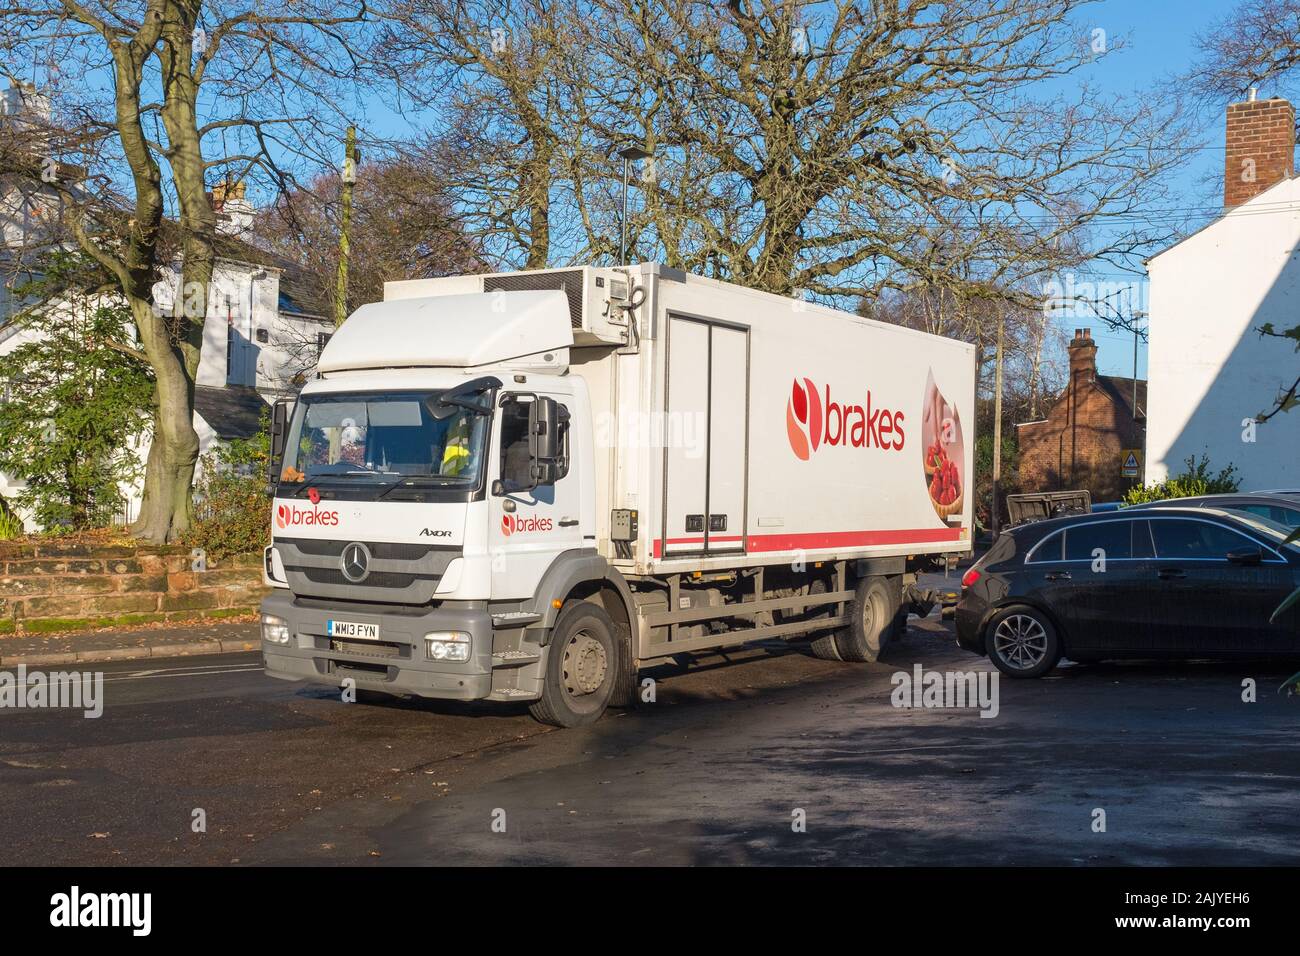 Brakes food service lorry parked outside pub delivering food in Harborne, Birmingham, UK Stock Photo